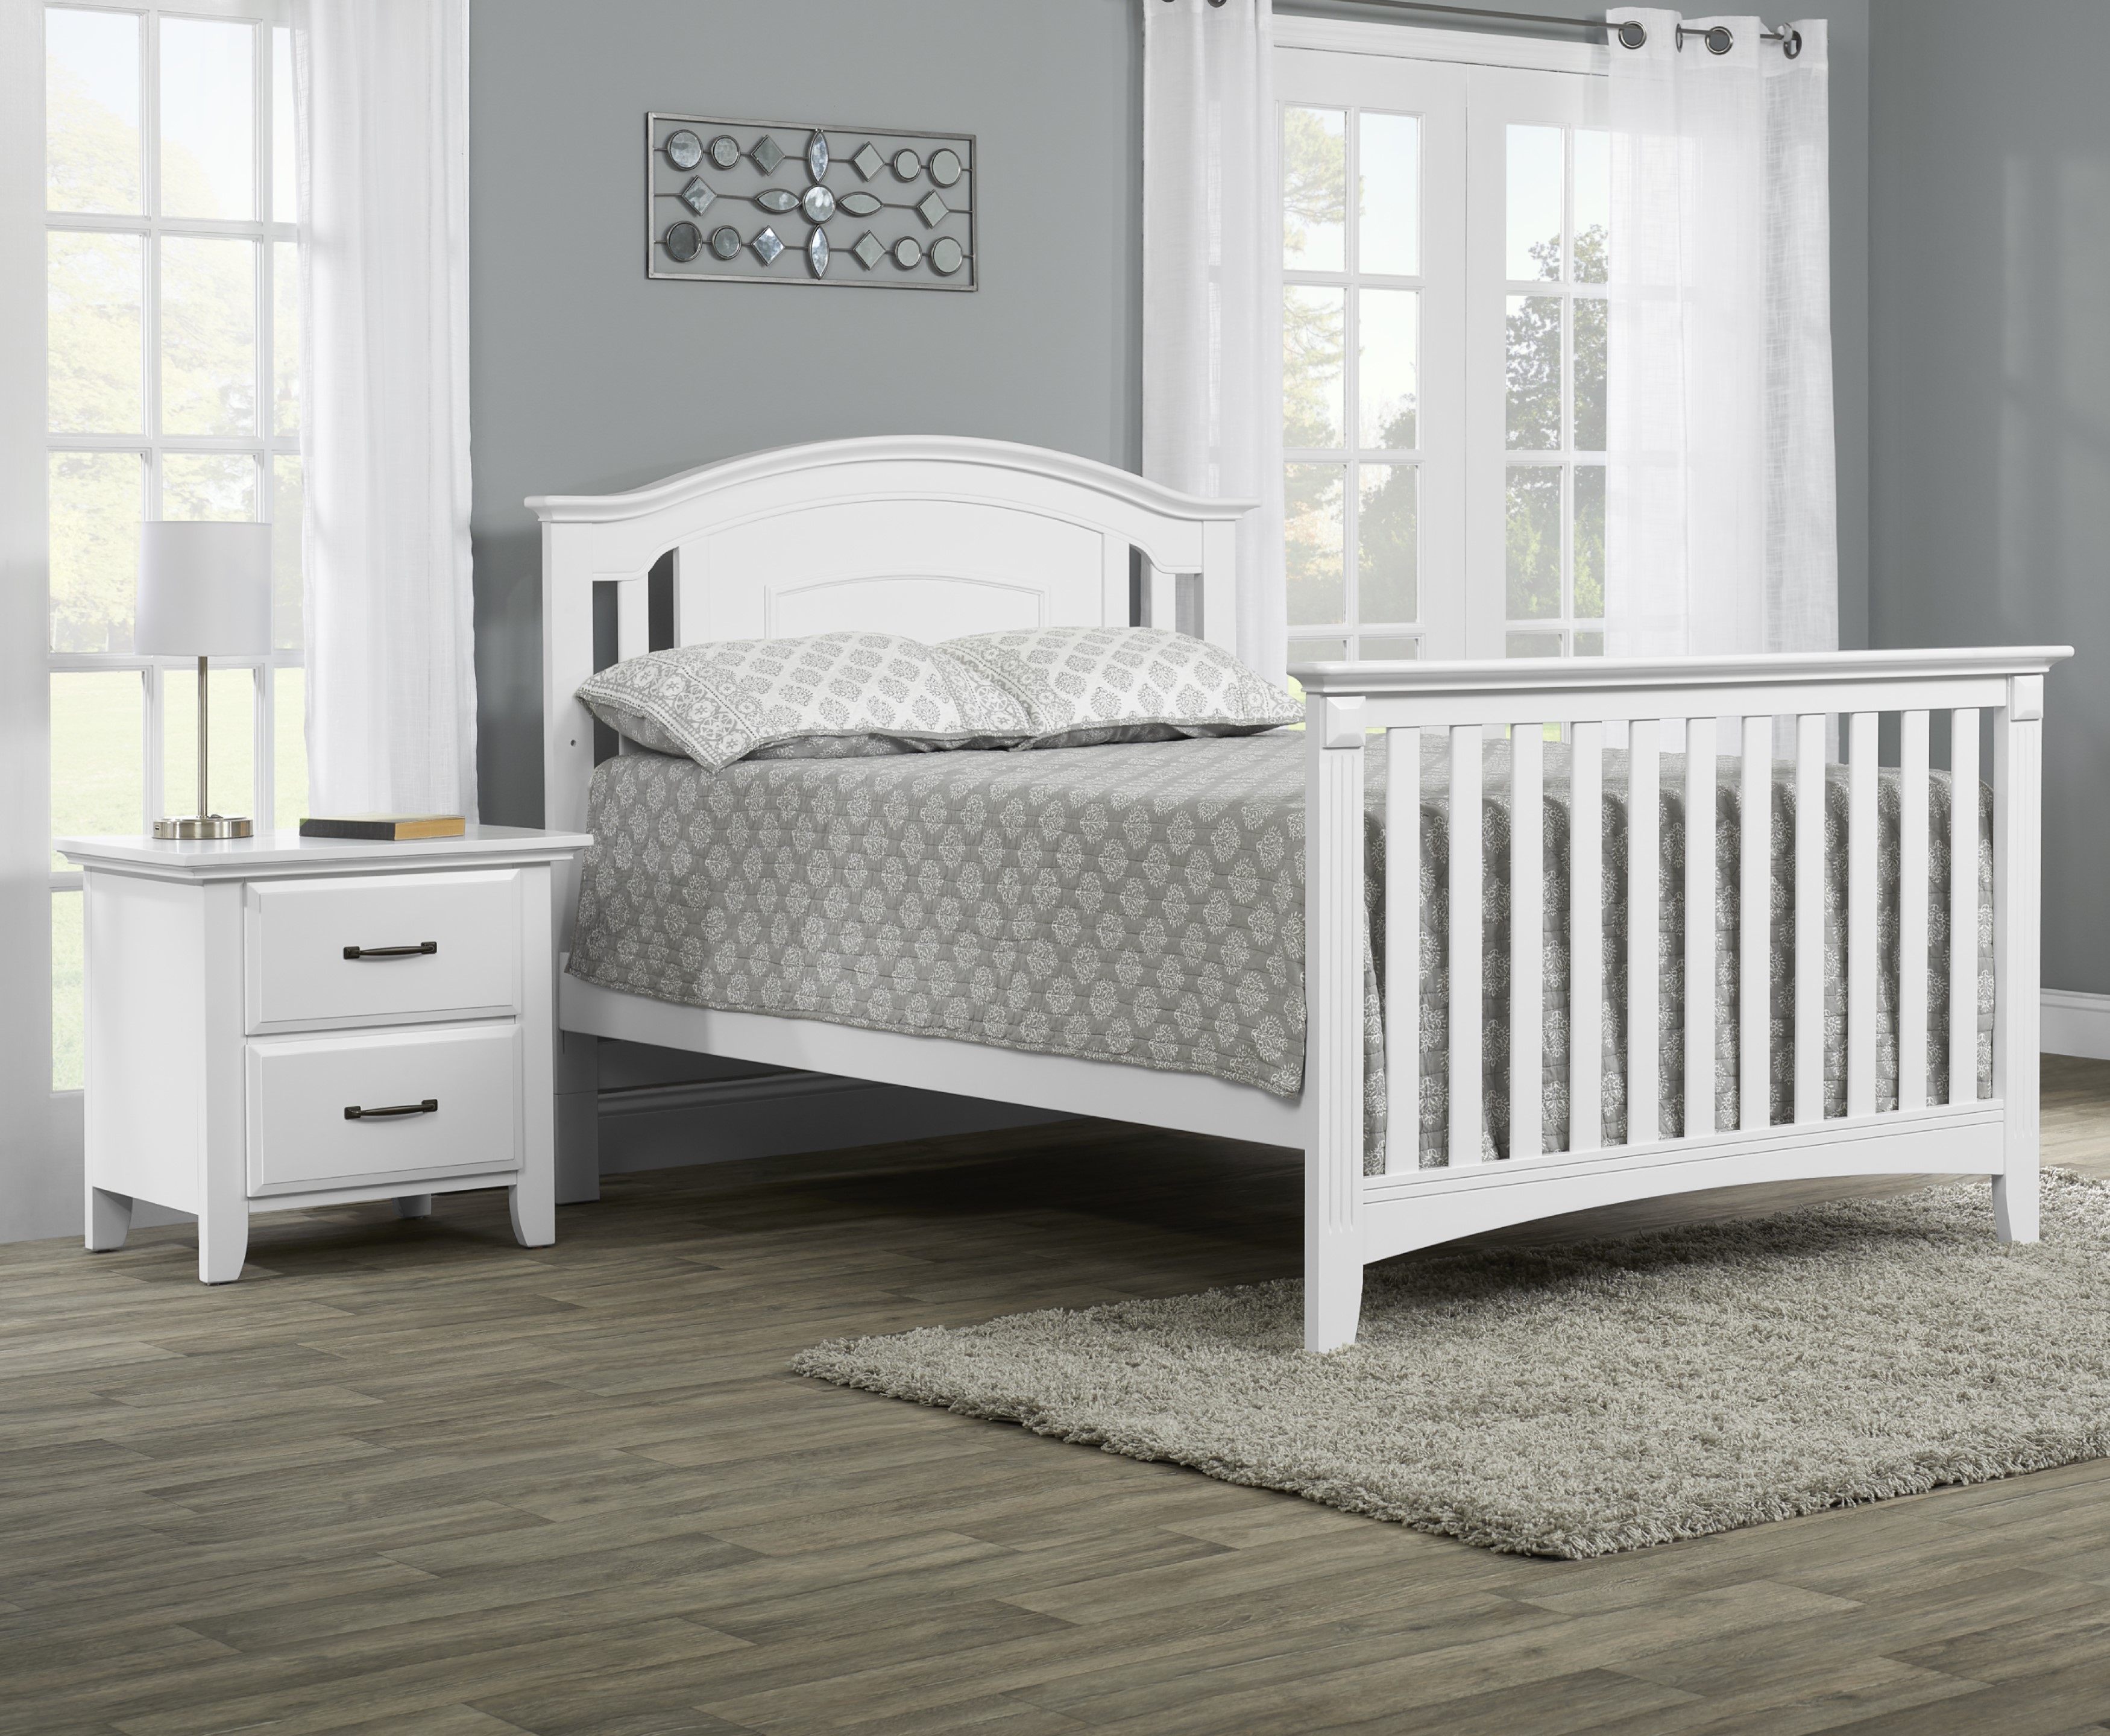 Oxford Baby Willowbrook 2-Drawer Nightstand, White - image 5 of 5